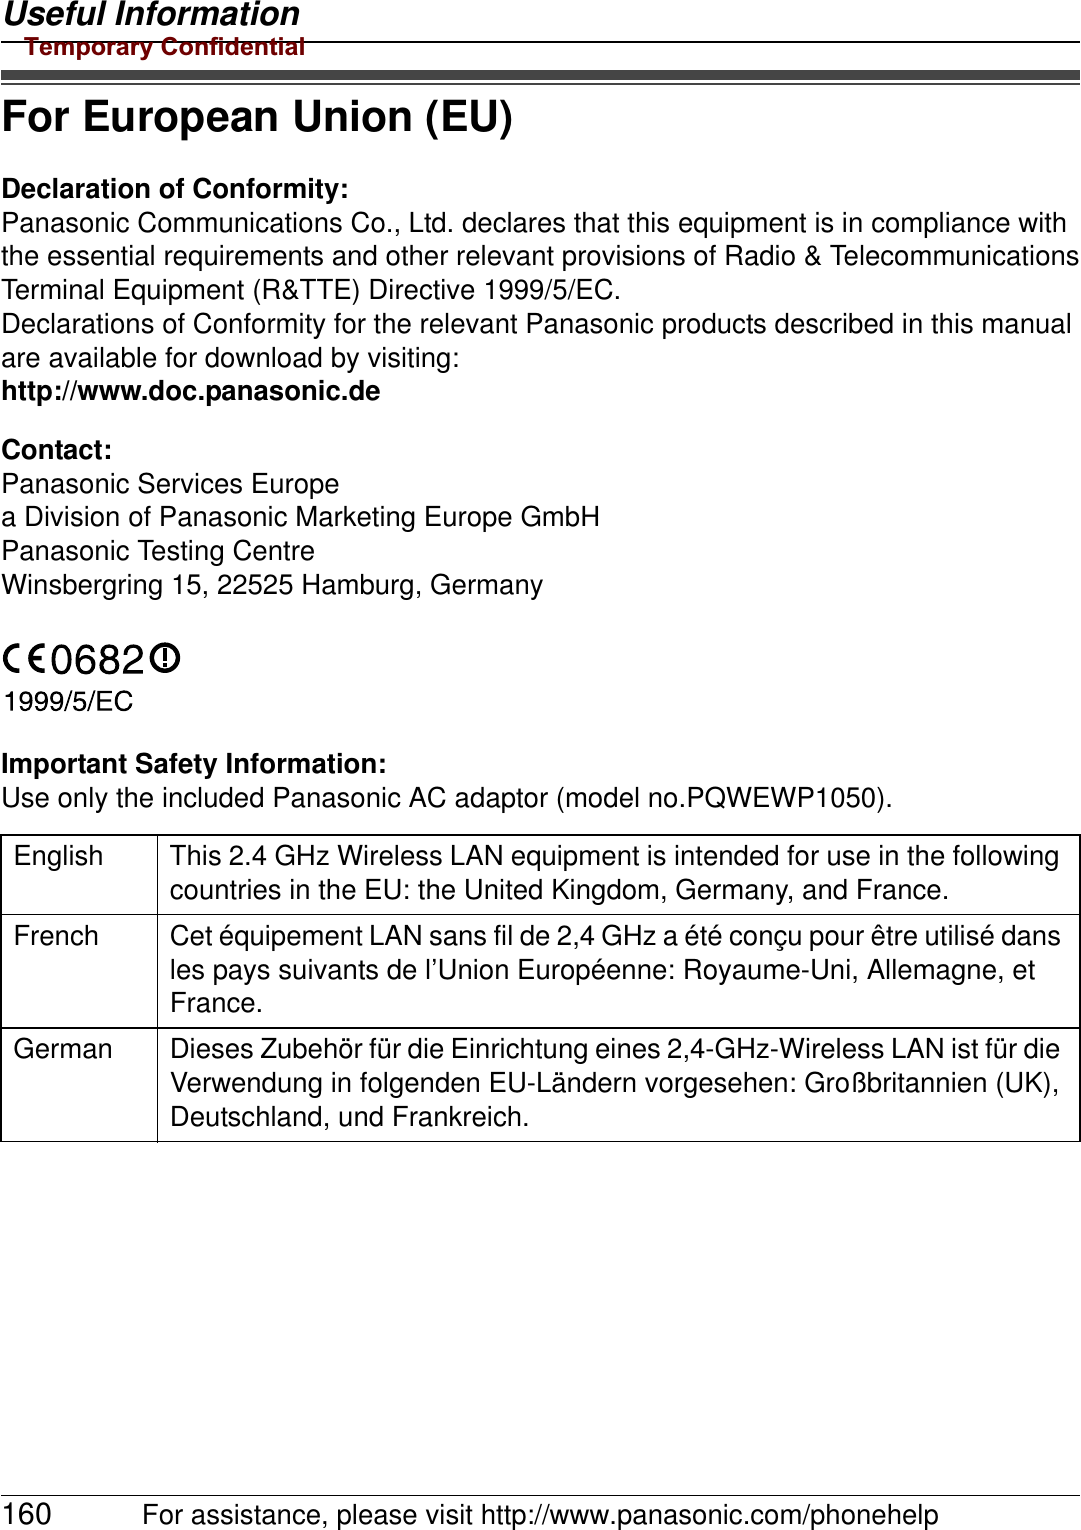 Useful Information160 For assistance, please visit http://www.panasonic.com/phonehelpFor European Union (EU)Declaration of Conformity:Panasonic Communications Co., Ltd. declares that this equipment is in compliance with the essential requirements and other relevant provisions of Radio &amp; TelecommunicationsTerminal Equipment (R&amp;TTE) Directive 1999/5/EC.Declarations of Conformity for the relevant Panasonic products described in this manual are available for download by visiting:http://www.doc.panasonic.deContact:Panasonic Services Europea Division of Panasonic Marketing Europe GmbHPanasonic Testing CentreWinsbergring 15, 22525 Hamburg, GermanyImportant Safety Information:Use only the included Panasonic AC adaptor (model no.PQWEWP1050).English This 2.4 GHz Wireless LAN equipment is intended for use in the following countries in the EU: the United Kingdom, Germany, and France.French Cet équipement LAN sans fil de 2,4 GHz a été conçu pour être utilisé dans les pays suivants de l’Union Européenne: Royaume-Uni, Allemagne, et France.German Dieses Zubehör für die Einrichtung eines 2,4-GHz-Wireless LAN ist für die Verwendung in folgenden EU-Ländern vorgesehen: Großbritannien (UK), Deutschland, und Frankreich.Temporary Confidential